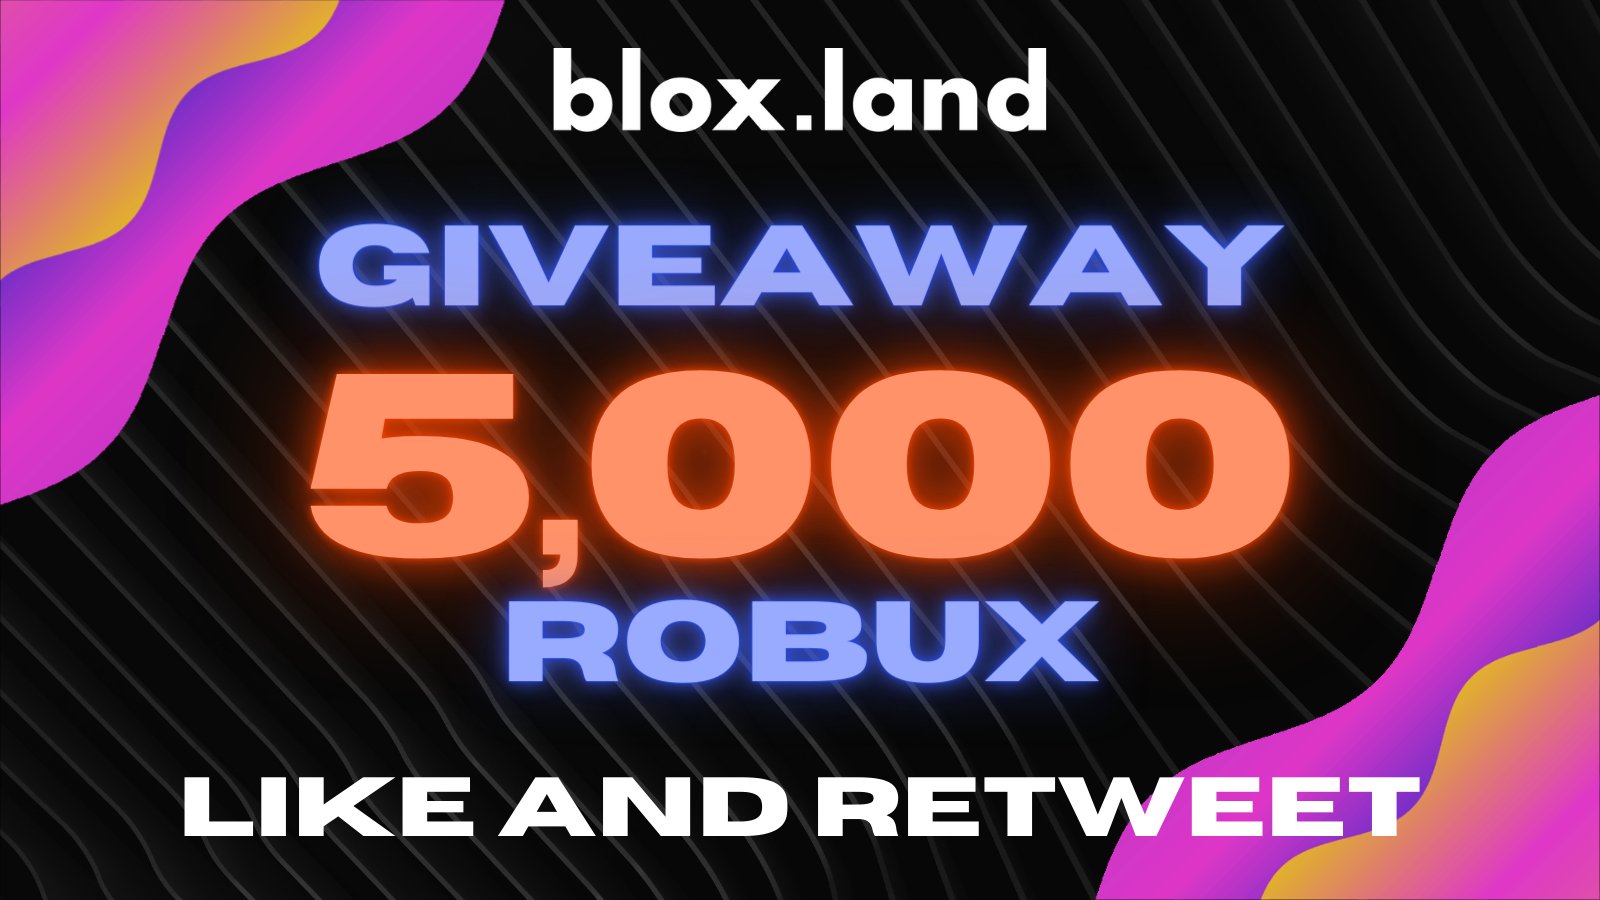 Lily on X: New Promo Code: ROBLOXIG500K Redeem here:   ⬅️ Congrats to Roblox on 500k Instagram followers!!  🎉 #Roblox  / X